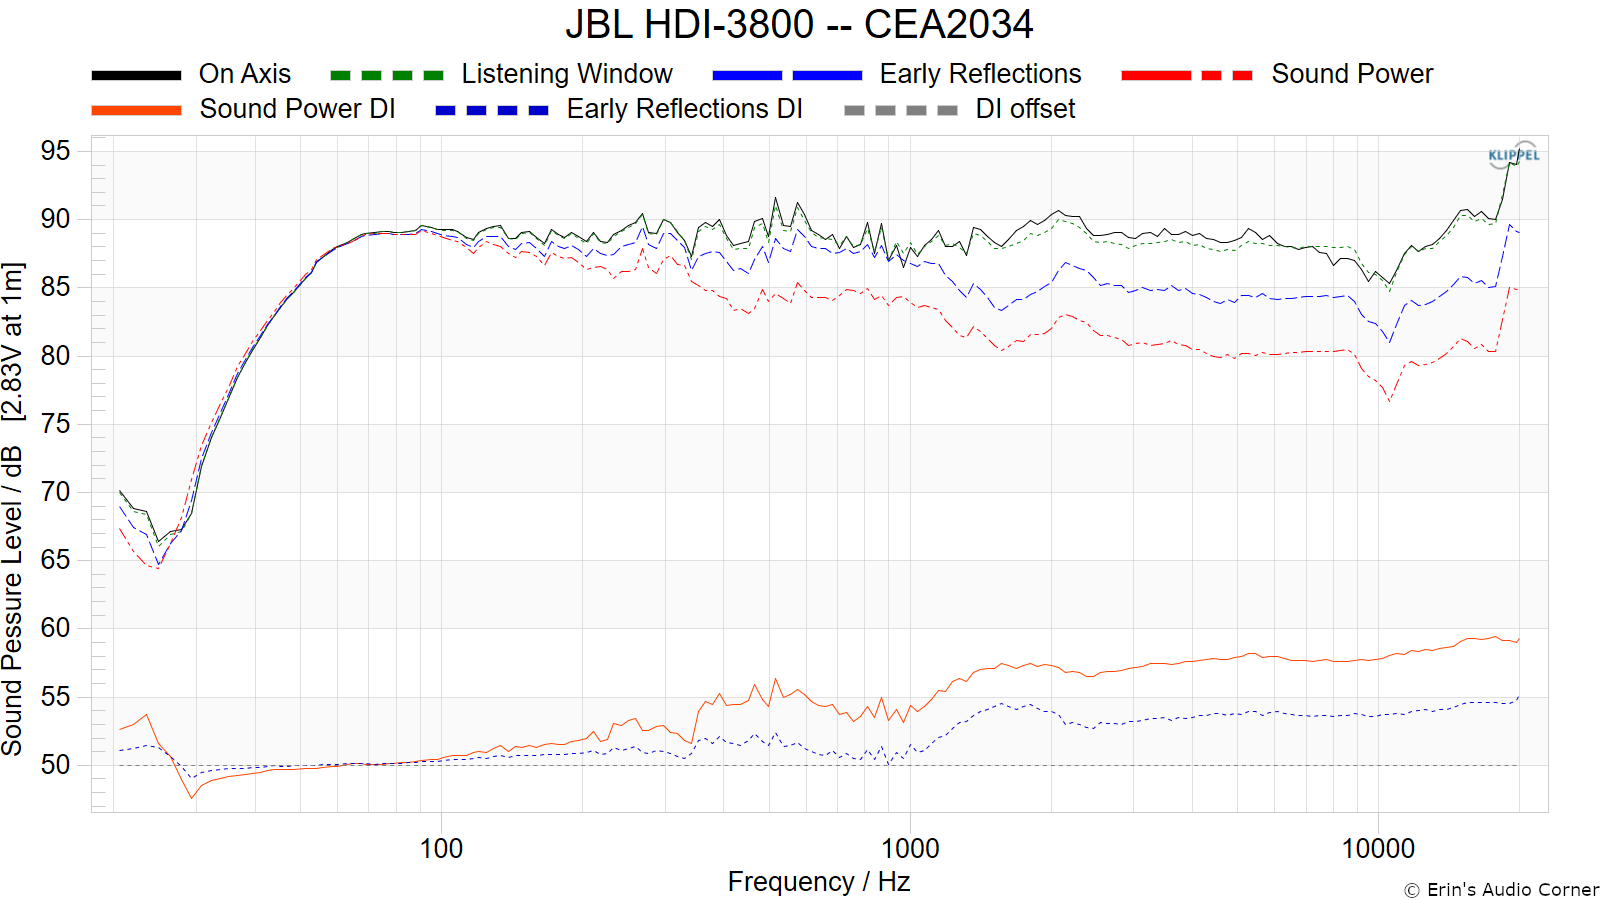 JBL HDI-3800 -- CEA2034 (old).png